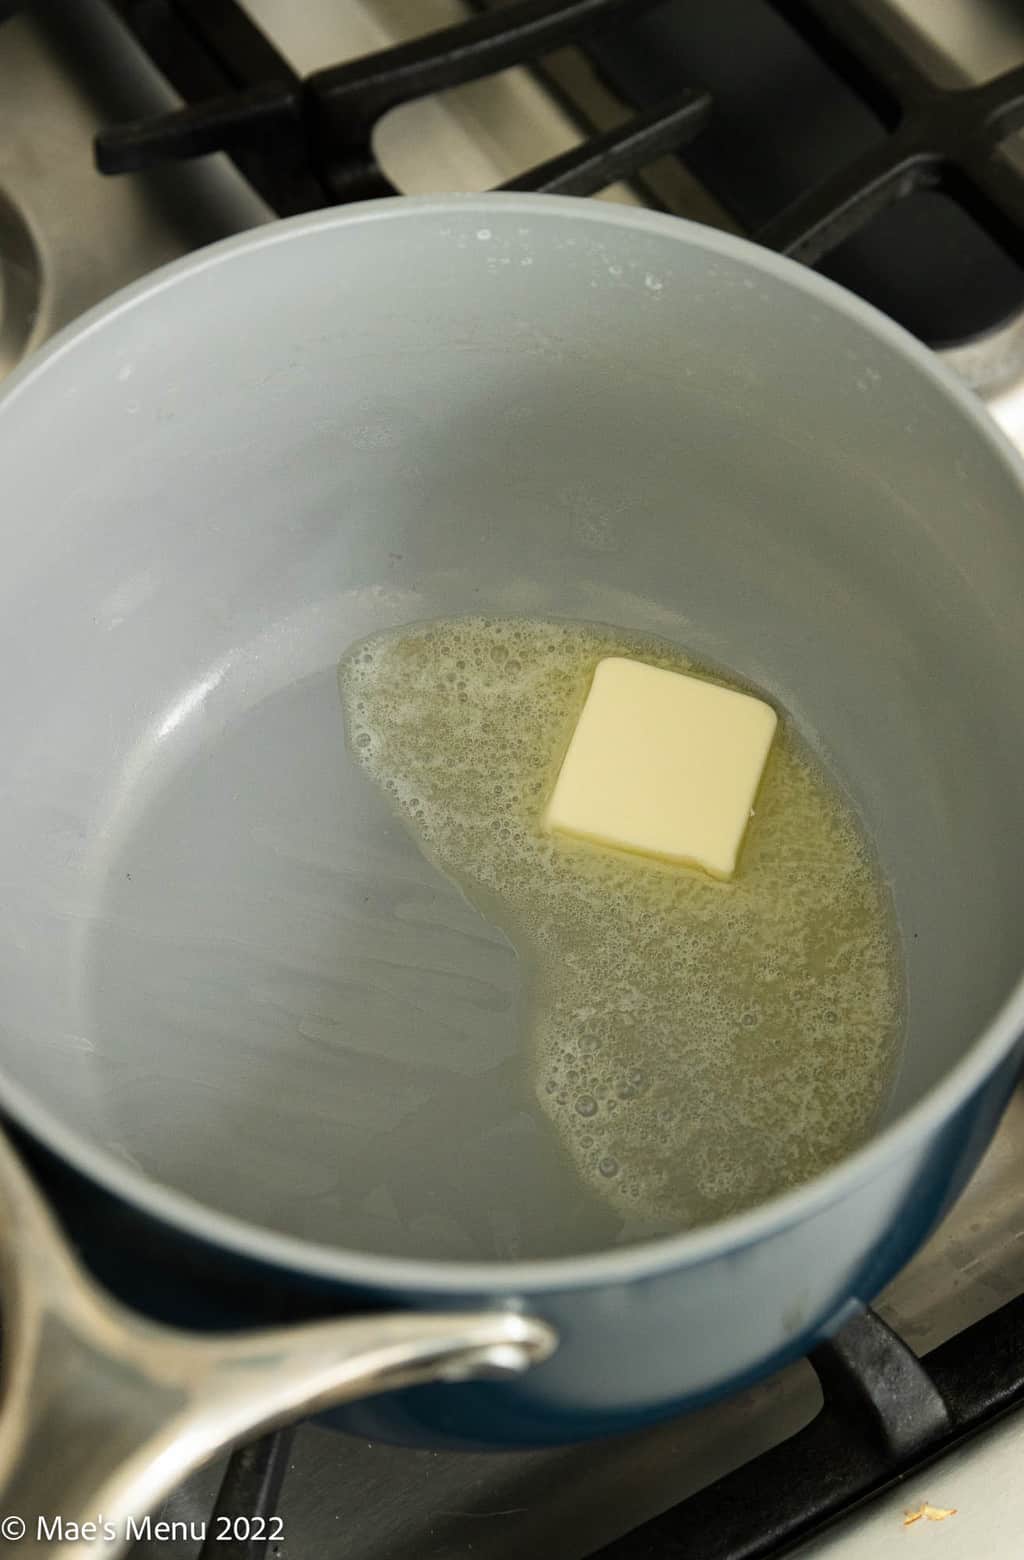 An overhead shot of a saucepan with melted butter in it.